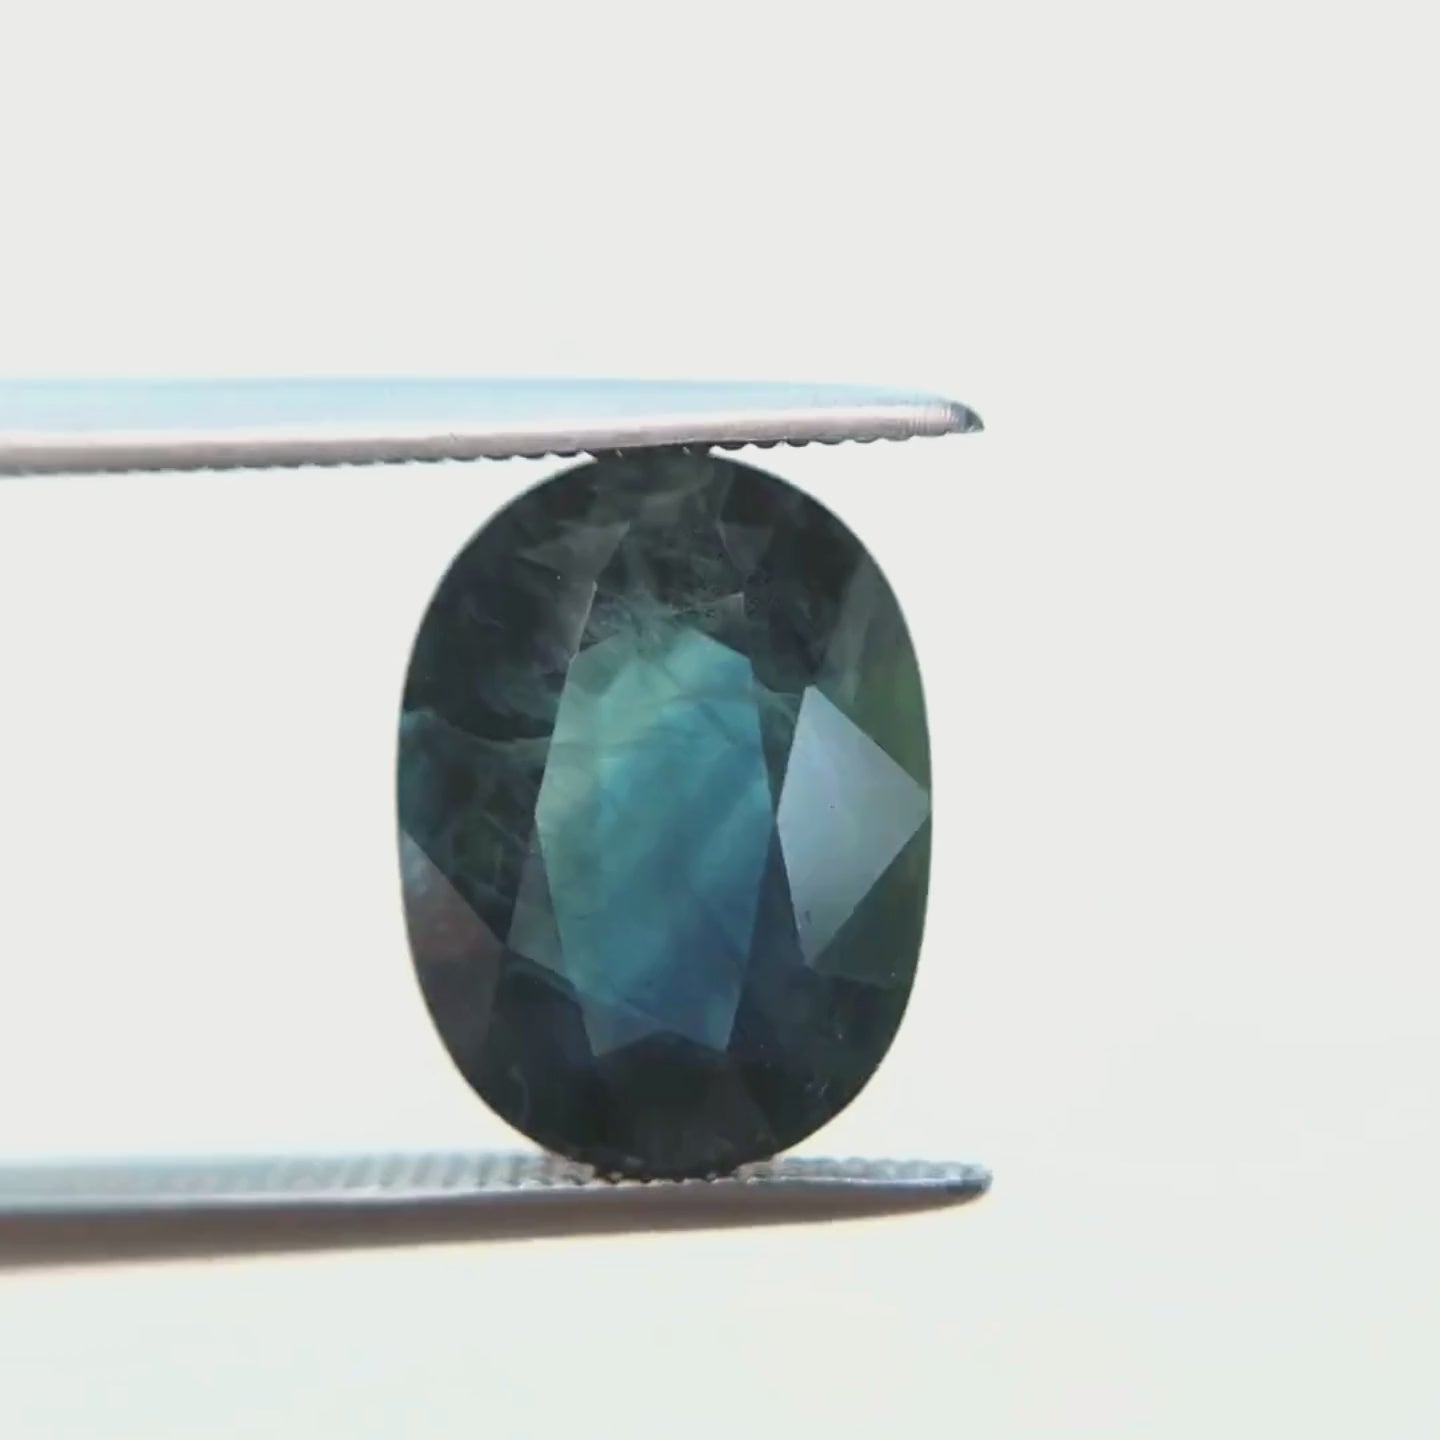 4.07 Carat Teal Oval Australian Sapphire for Custom Work - Inventory Code TOS407